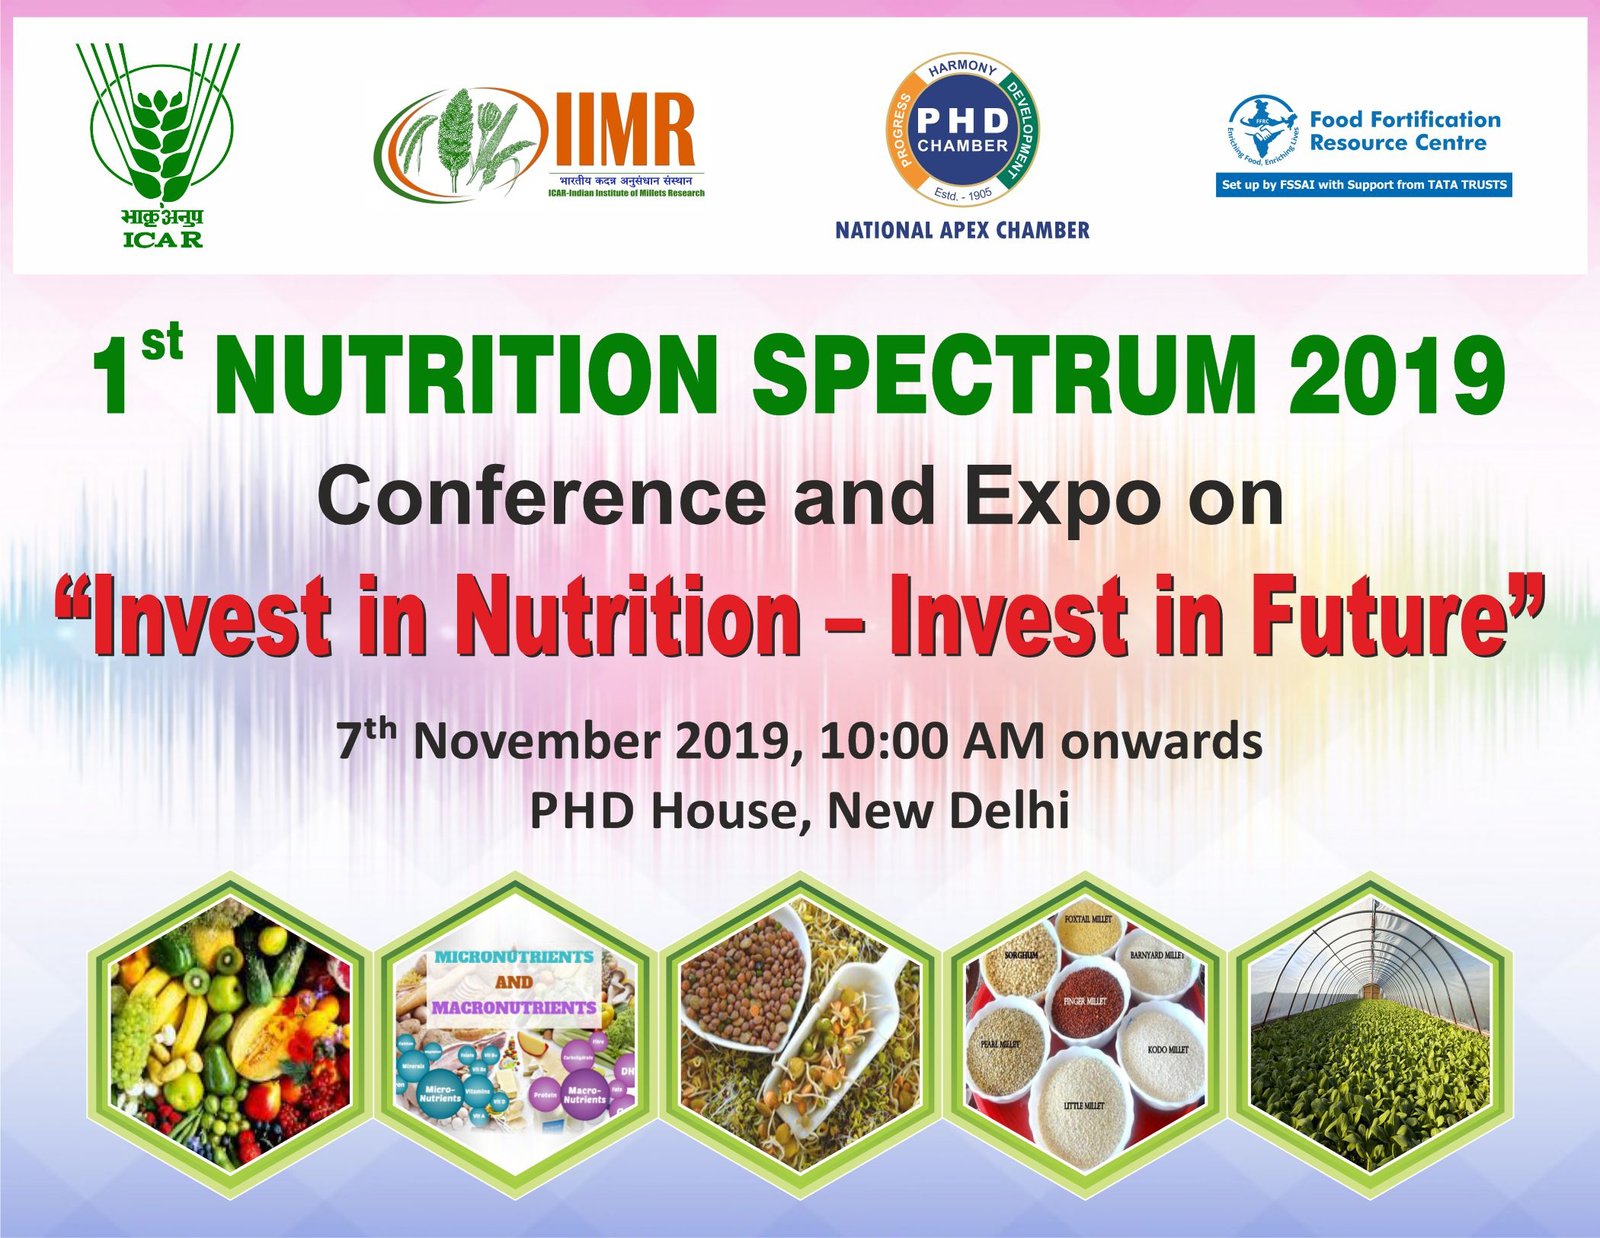 1st Nutrition Spectrum 2019, scheduled to be held on 7th November 2019